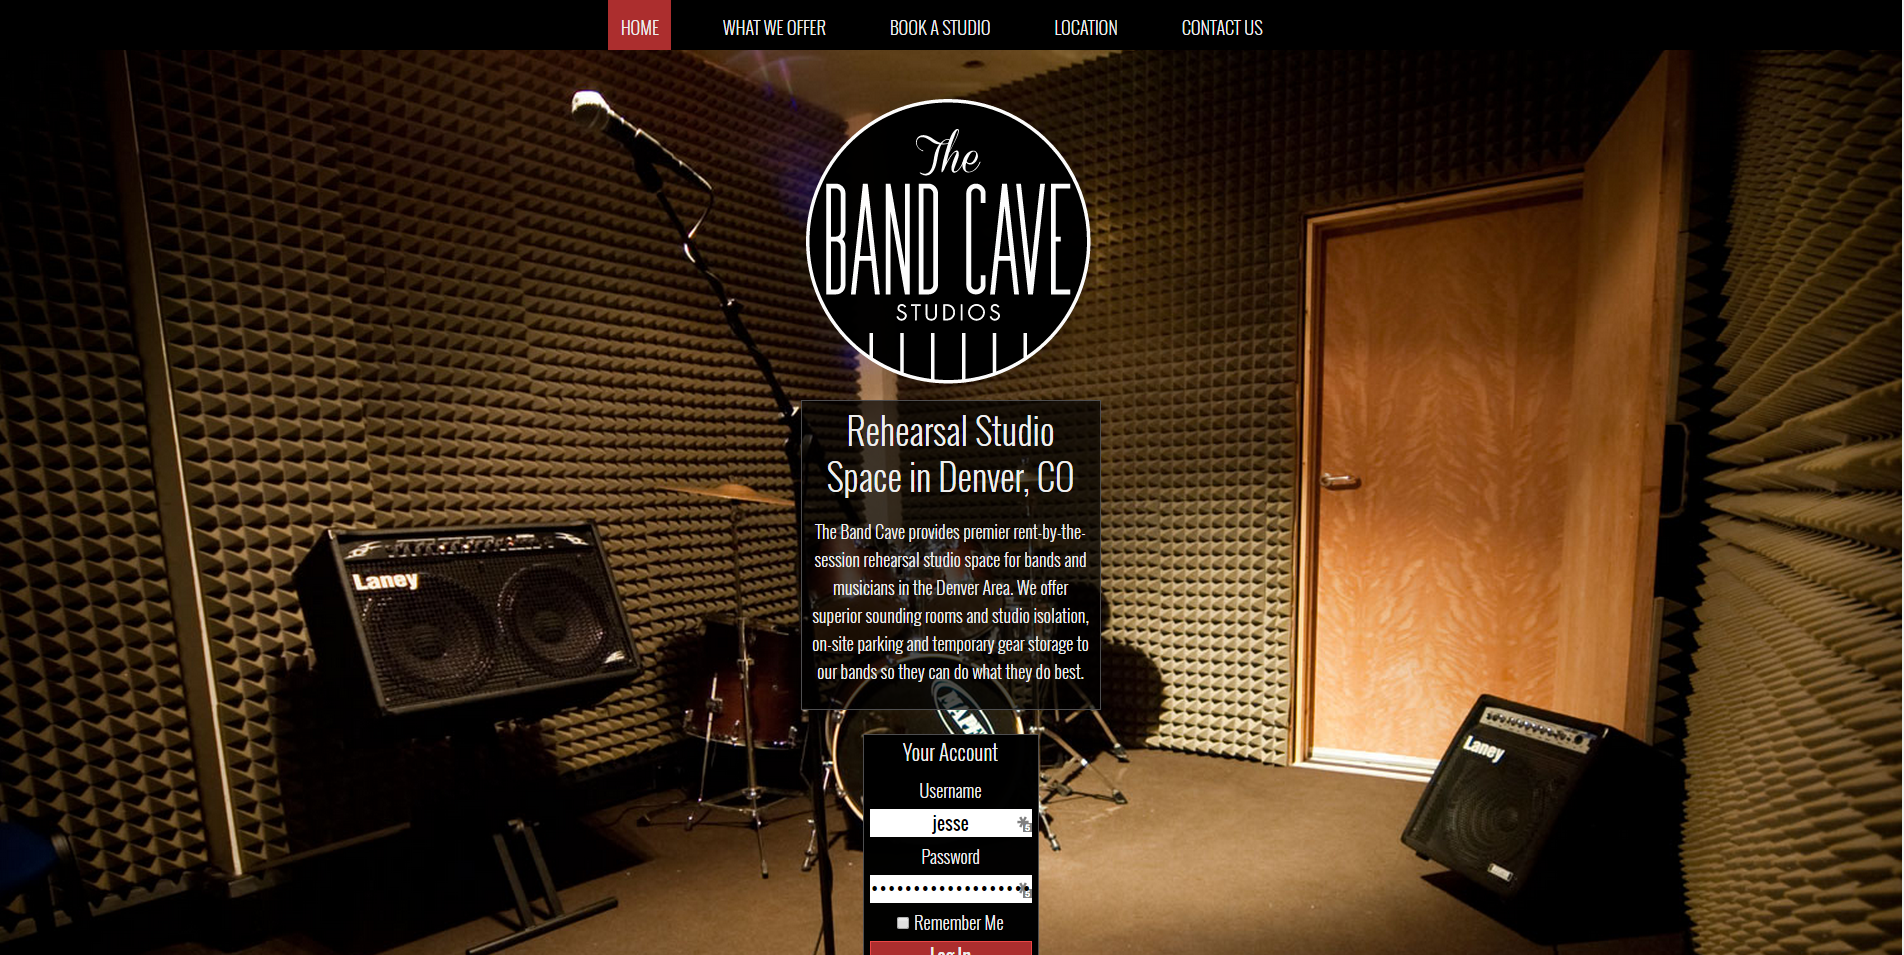 The Band Cave Studios